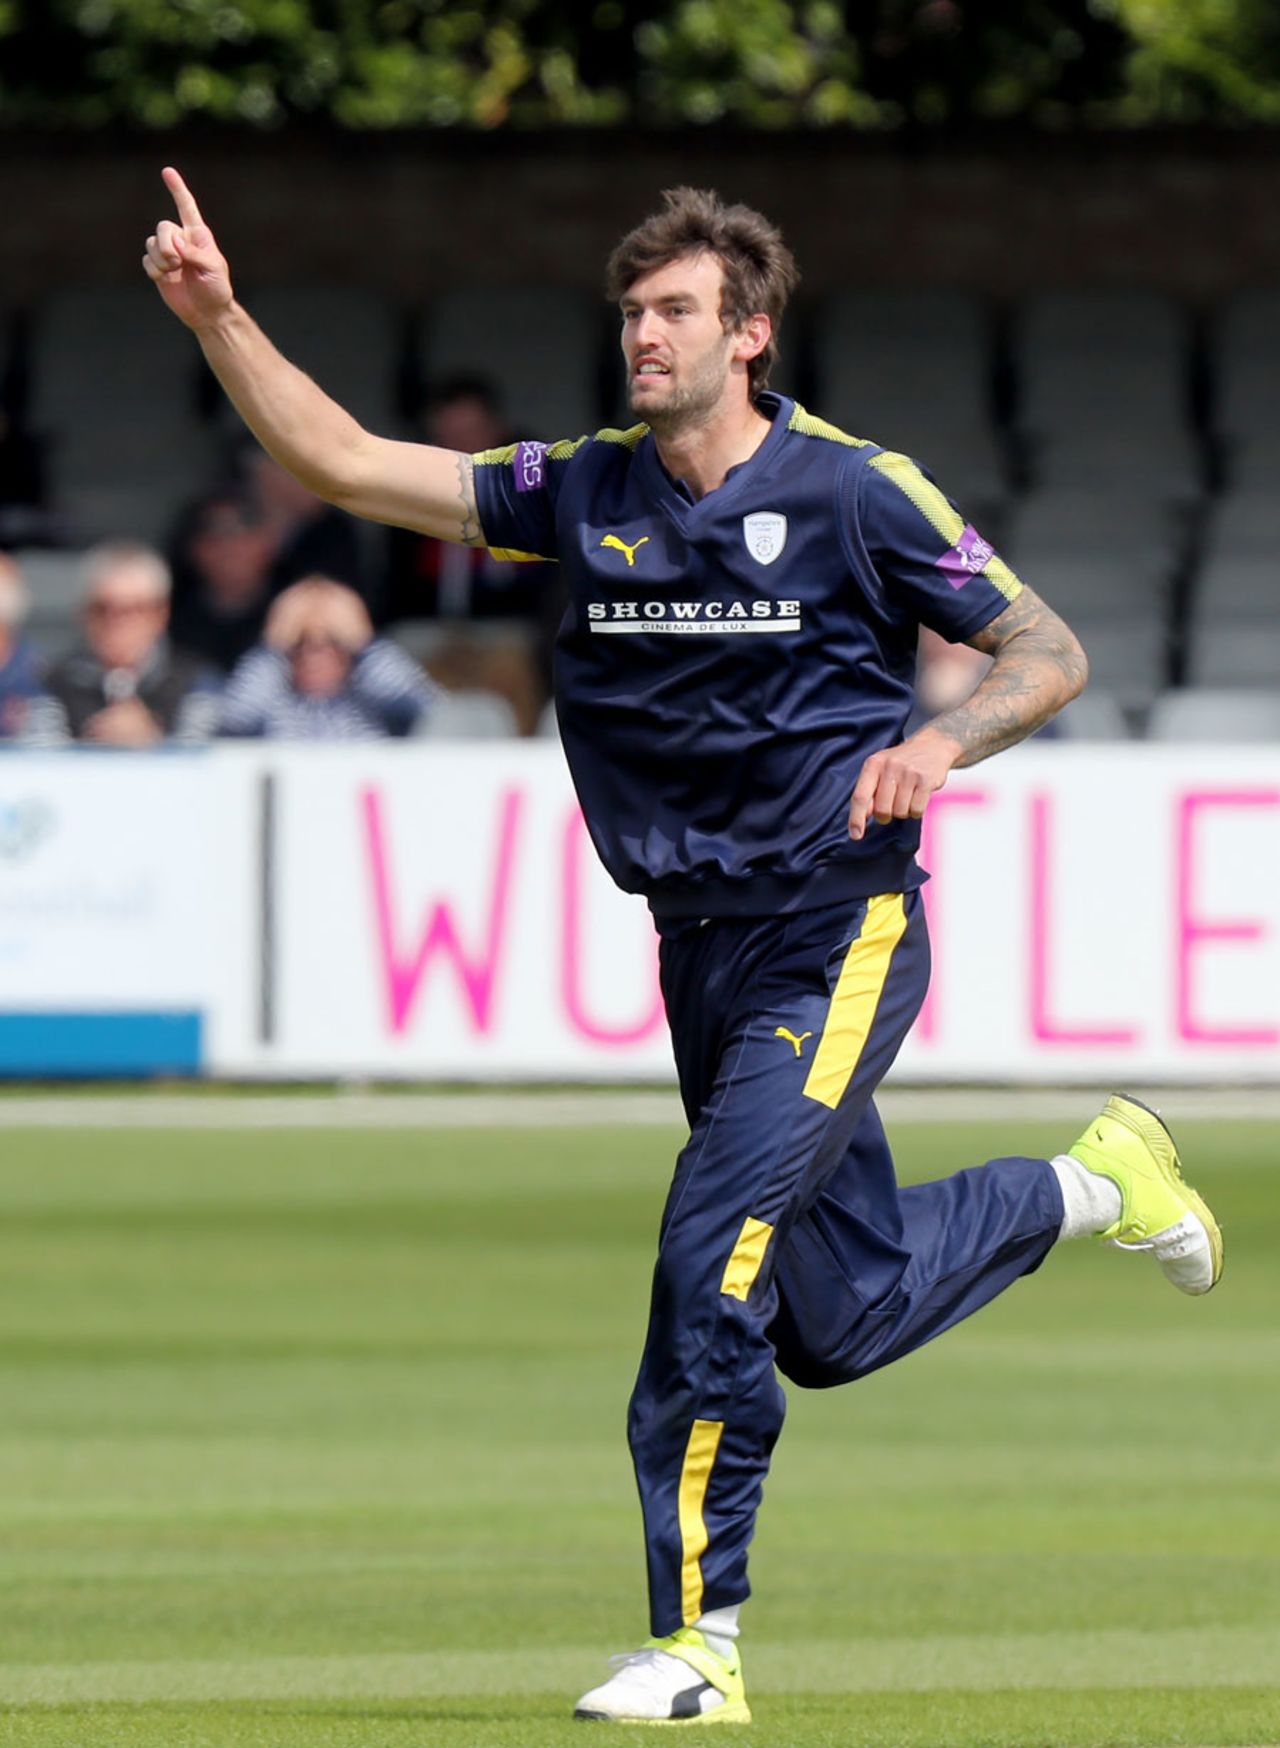 Reece Topley celebrates a wicket against his former county, Essex v Hampshire, Royal London Cup, South Group, Chelmsford, April 30, 2017